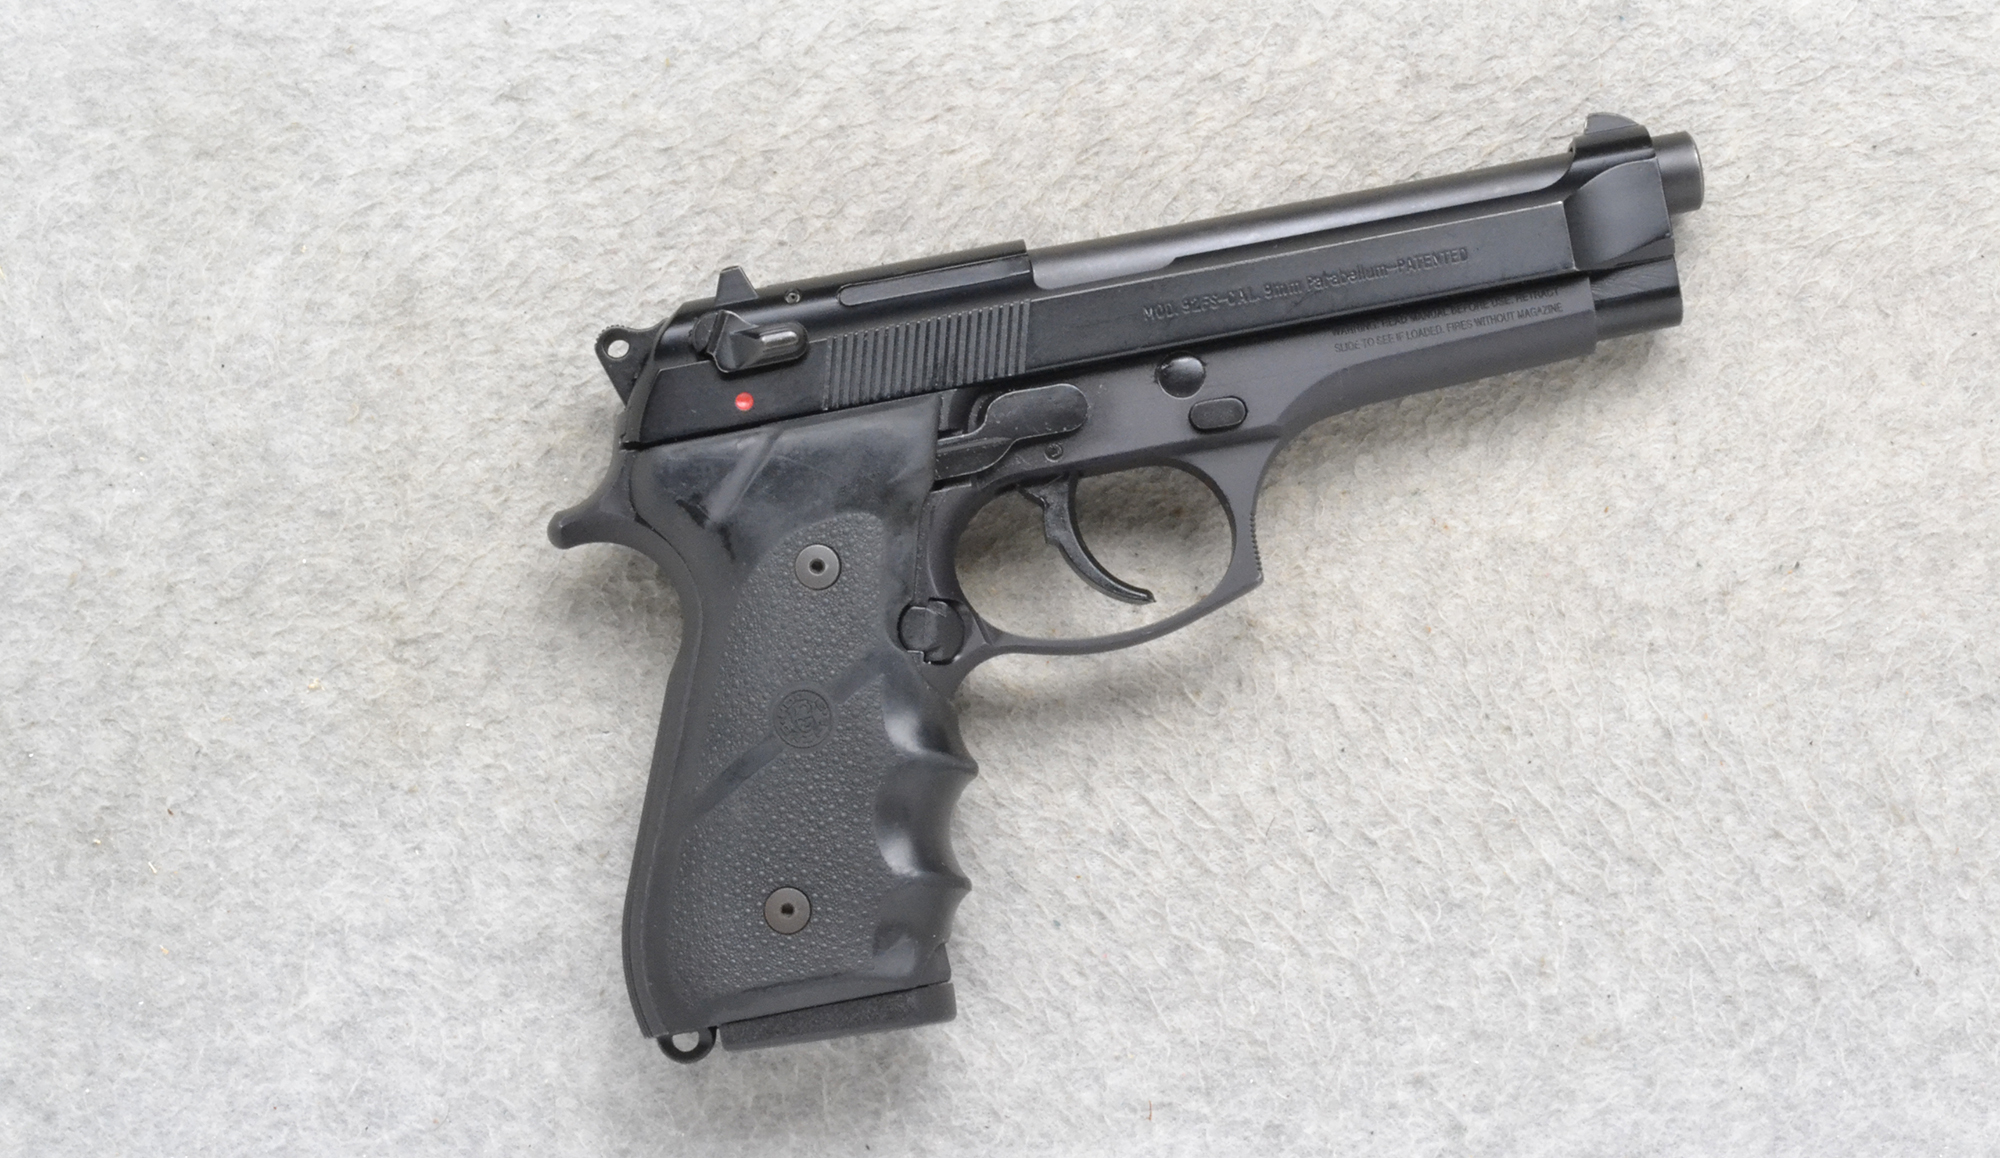 A Brief History of the Beretta 92 Pistol - The Mag Life